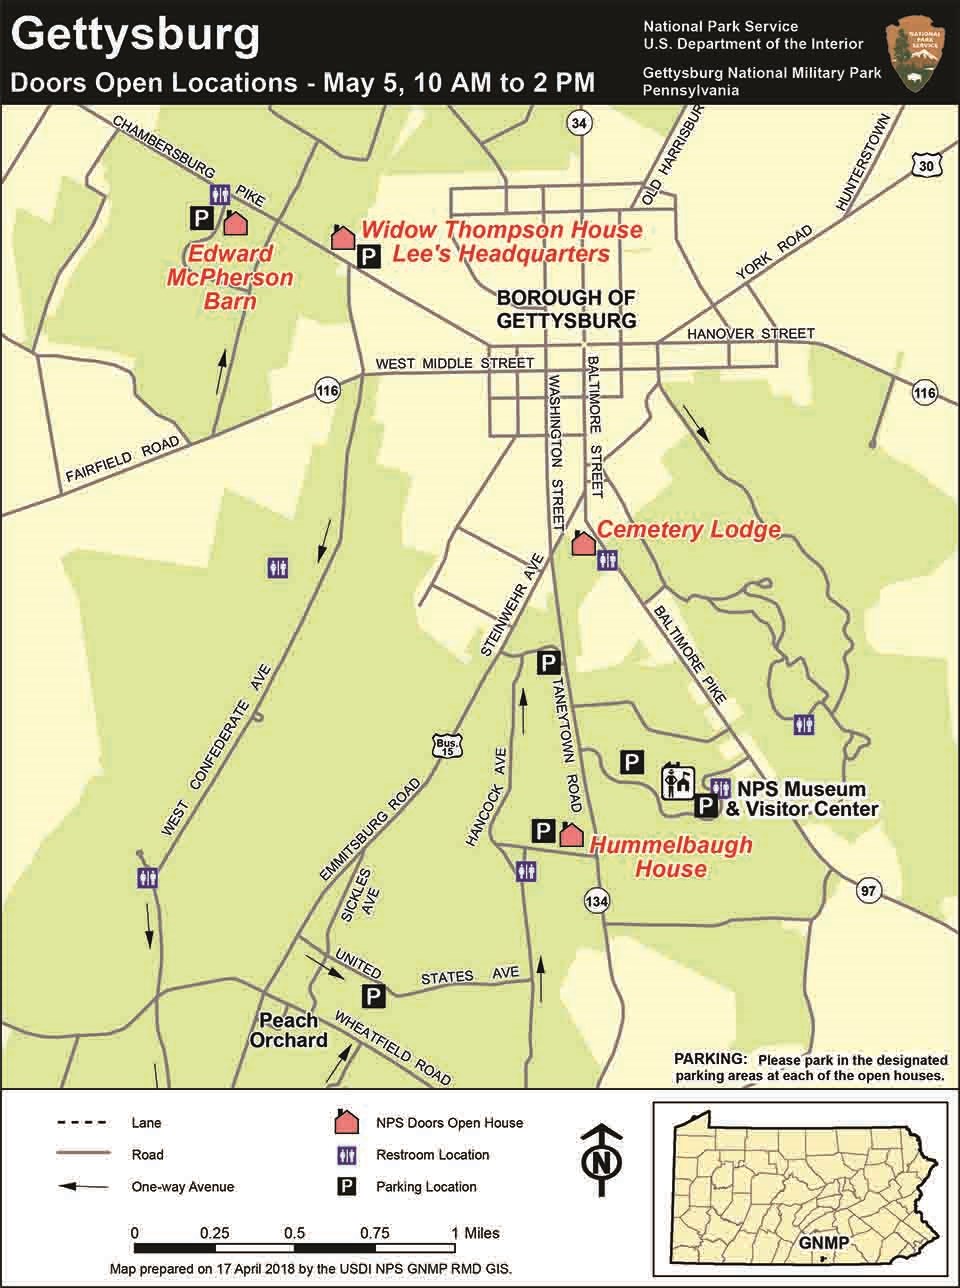 A map of Gettysburg showing the locations of the four Doors Open locations.